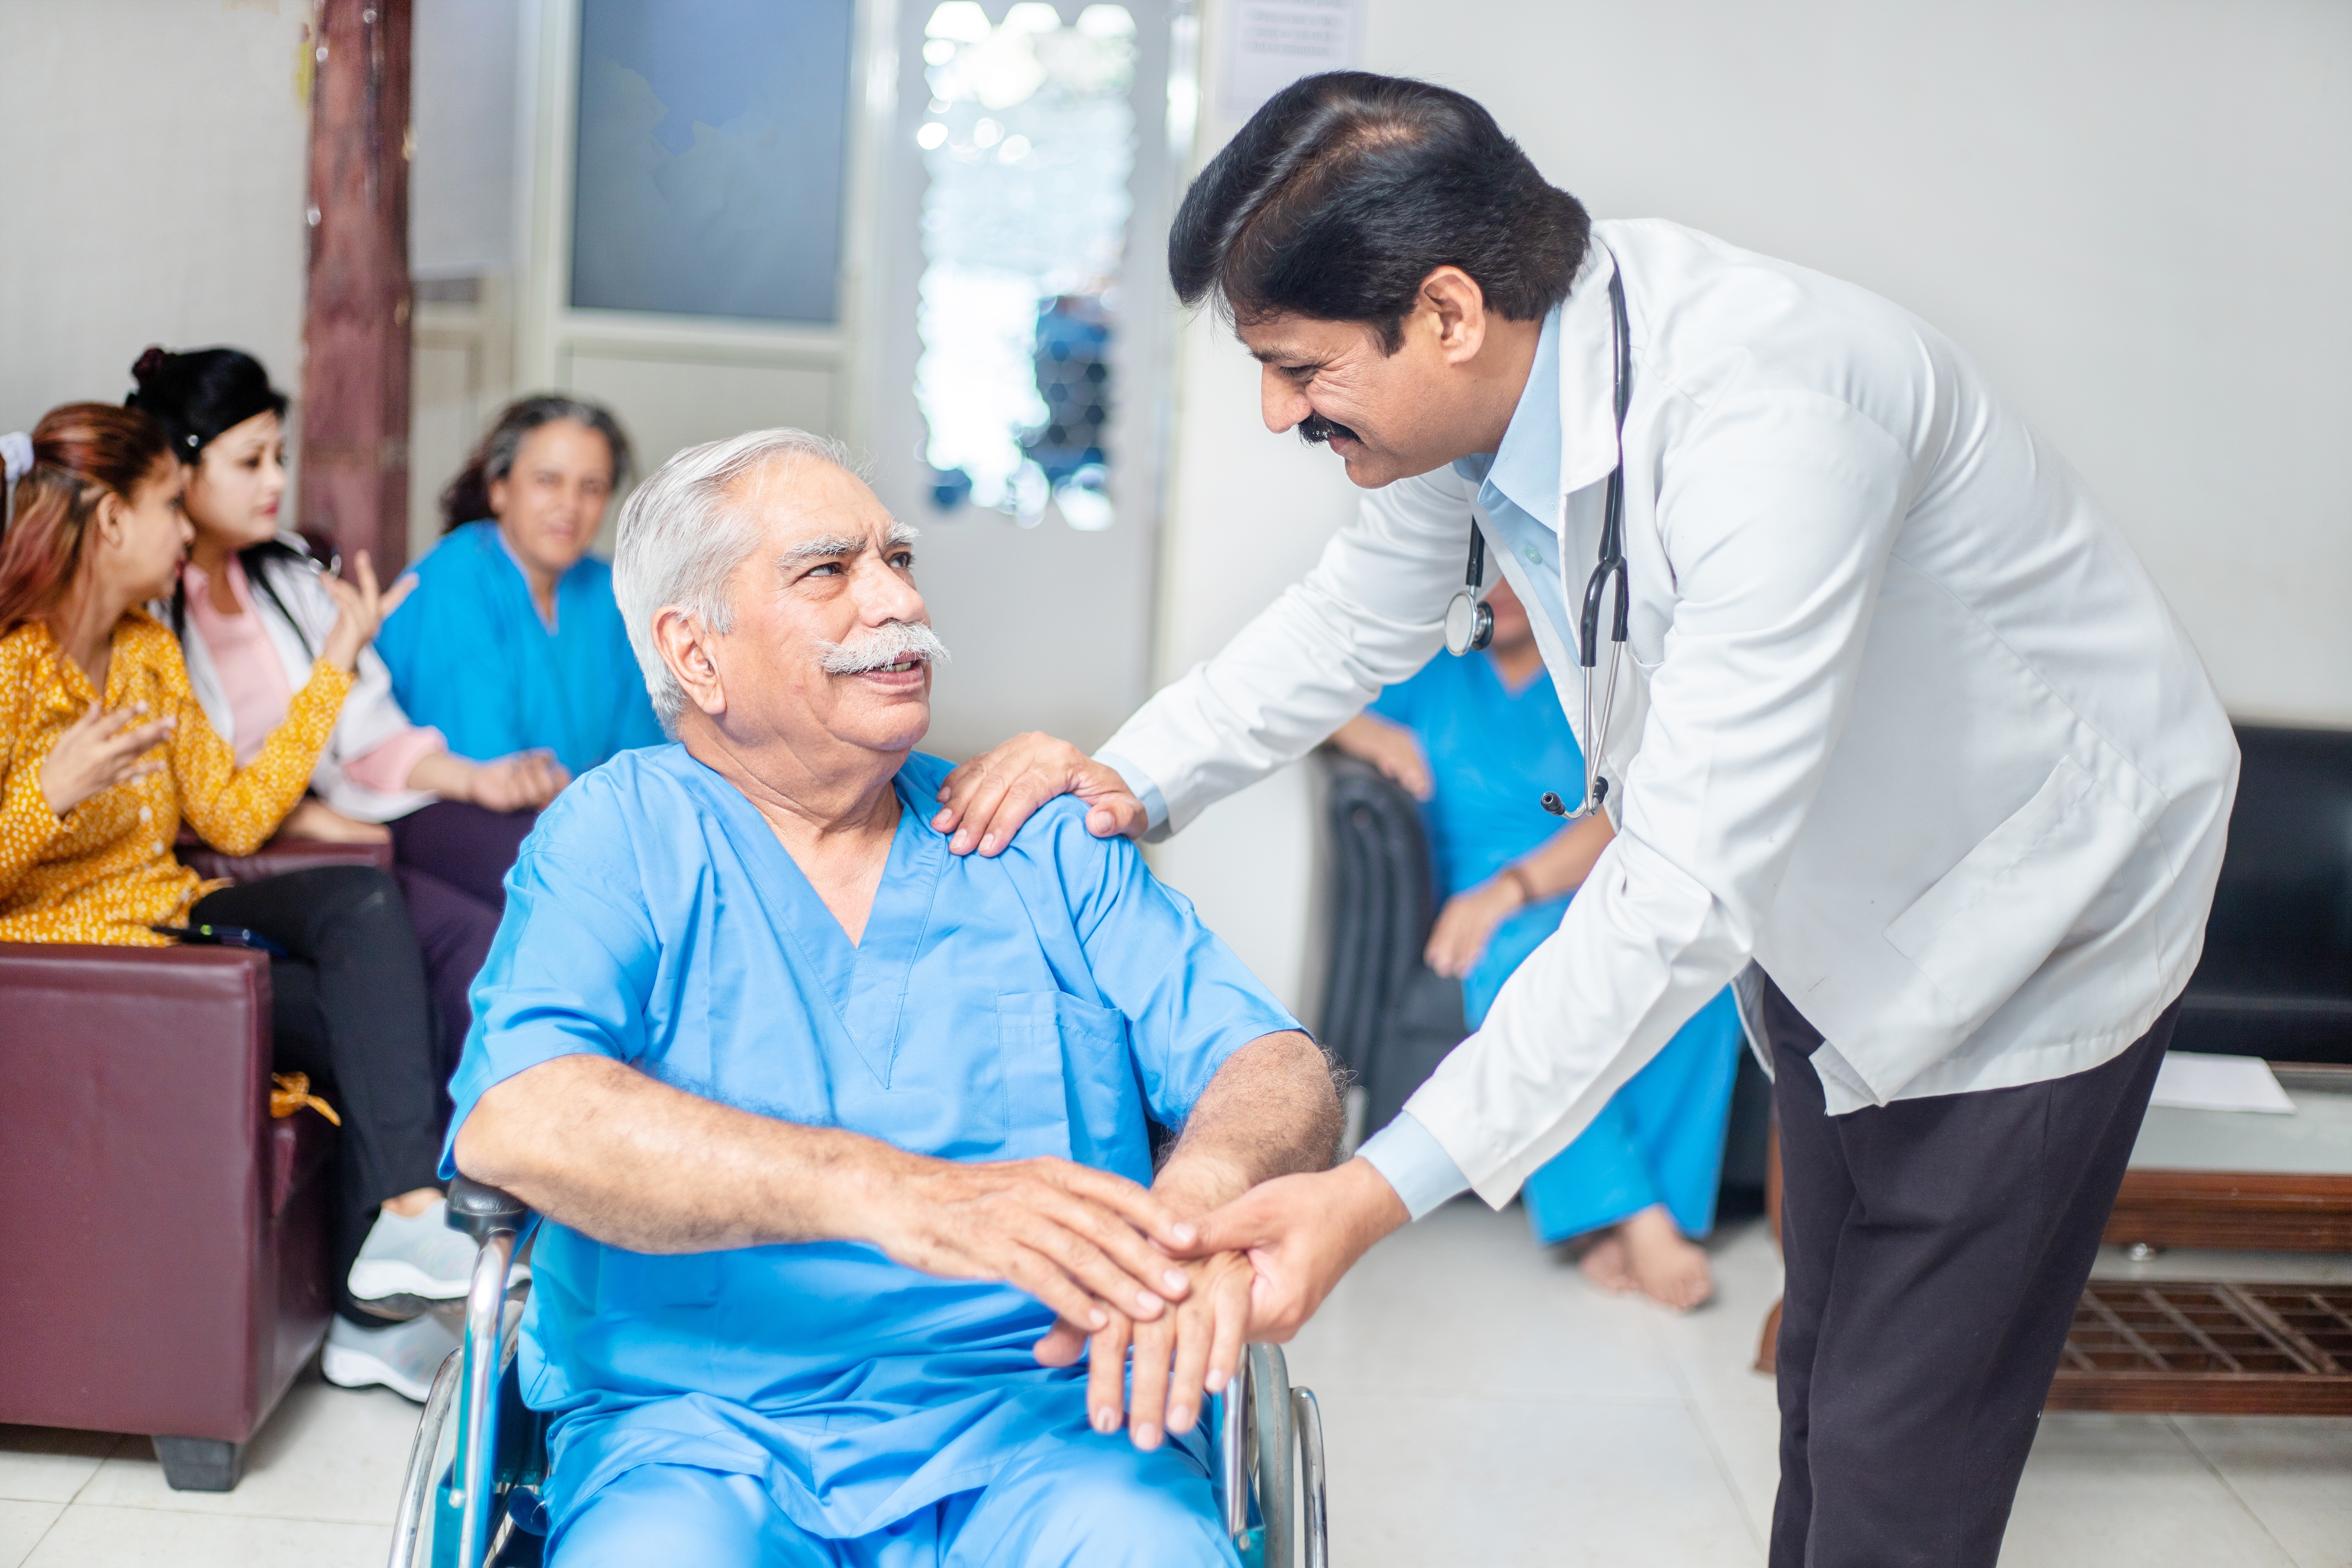 Planning and Coordination of Care for Elderly Patients Discharged from Hospitals